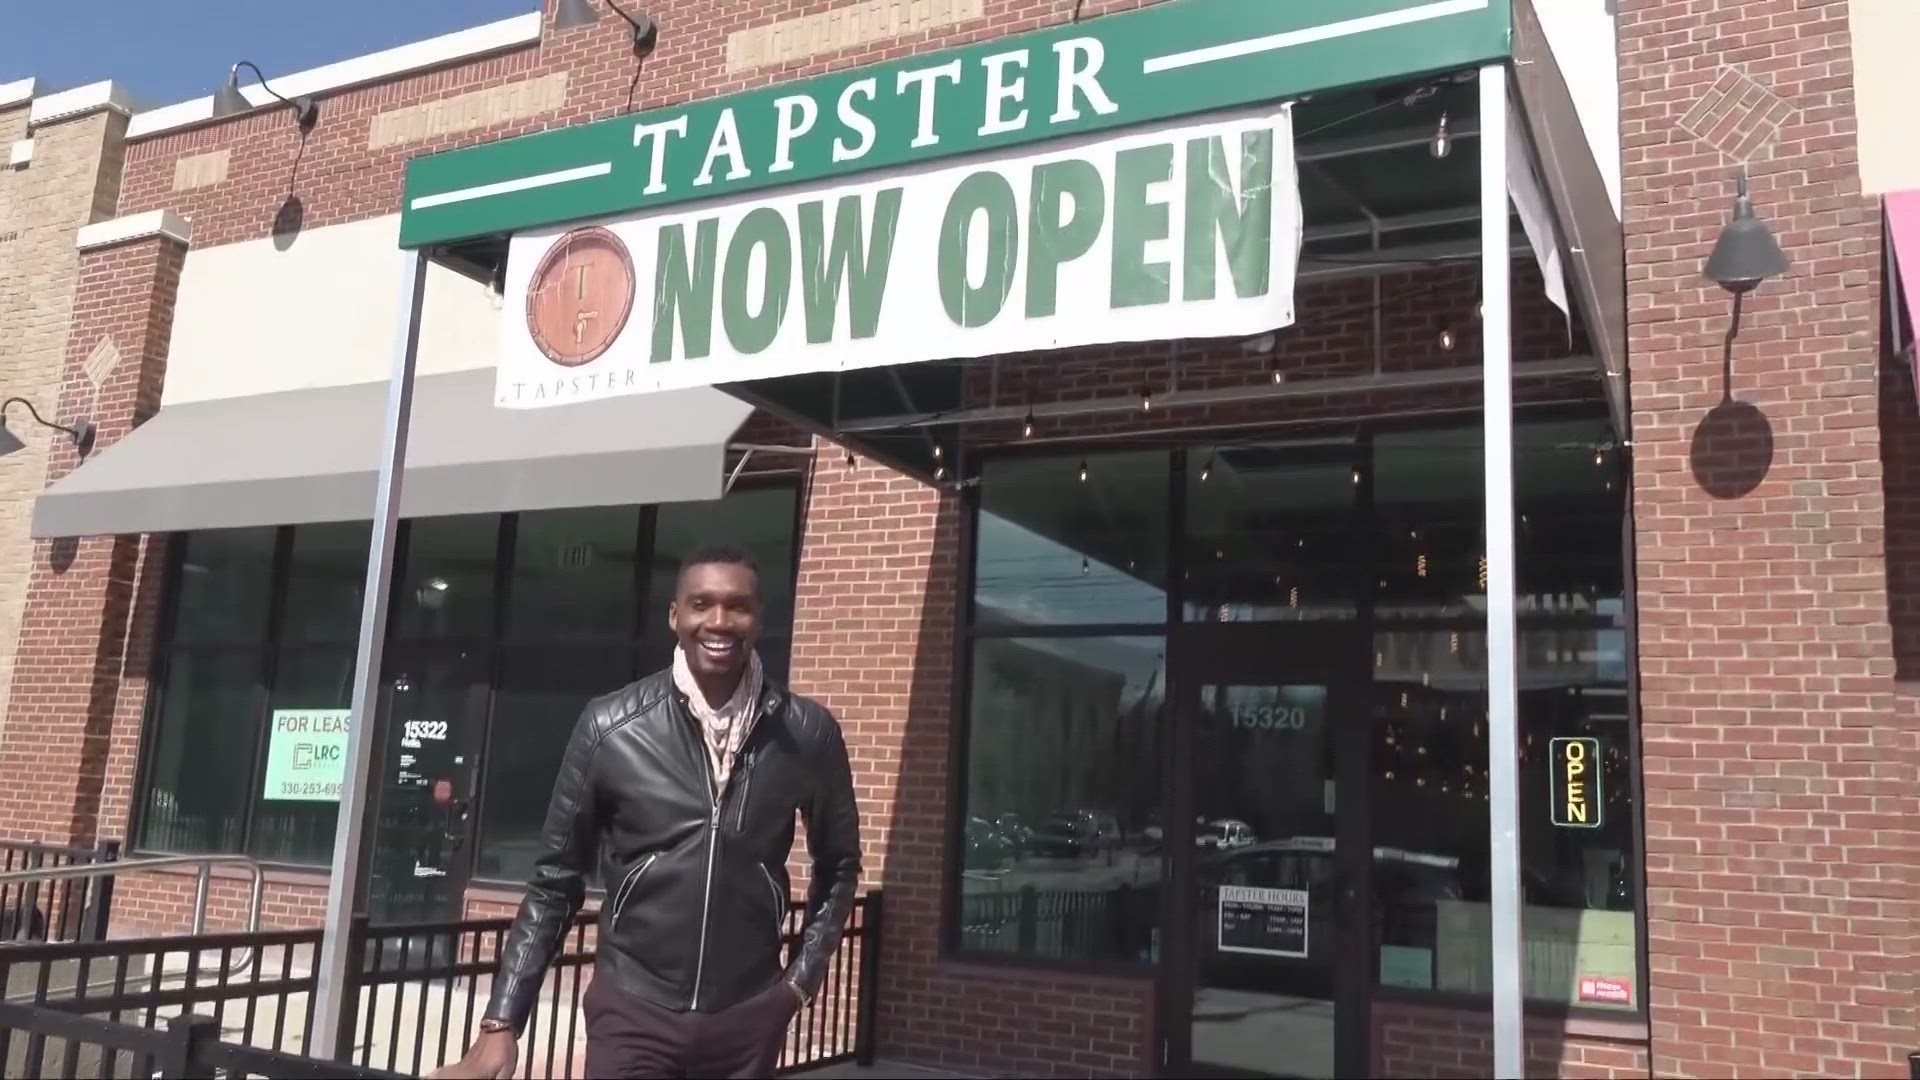 Tapster, a new bar and tasting room, has bloomed just in time for Spring.